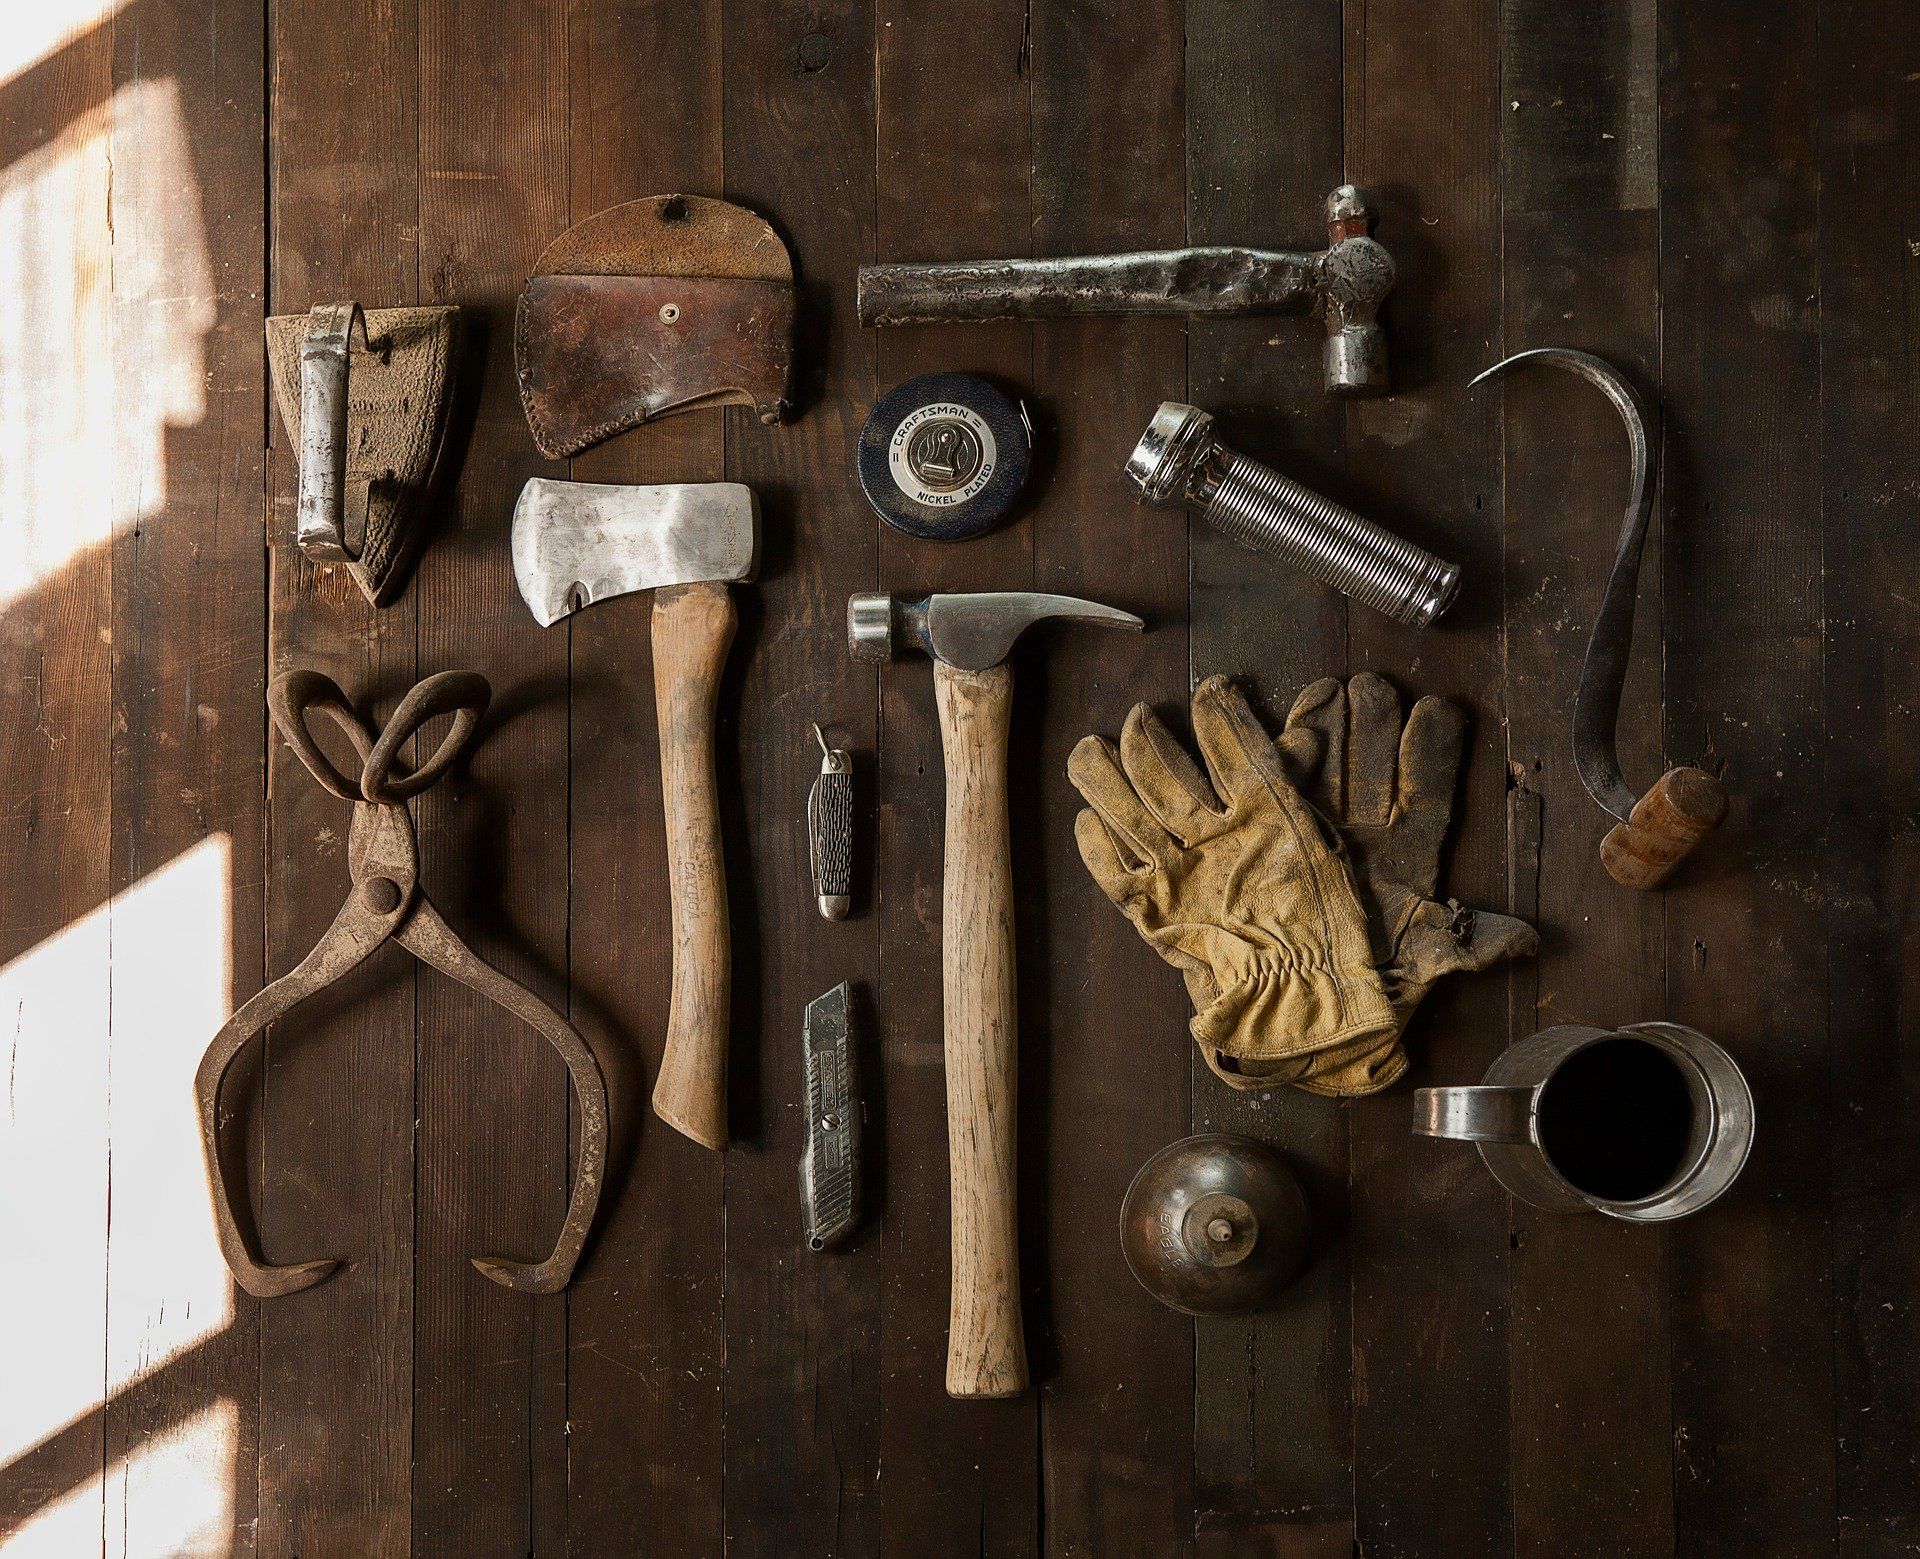 Tools on a wooden floor